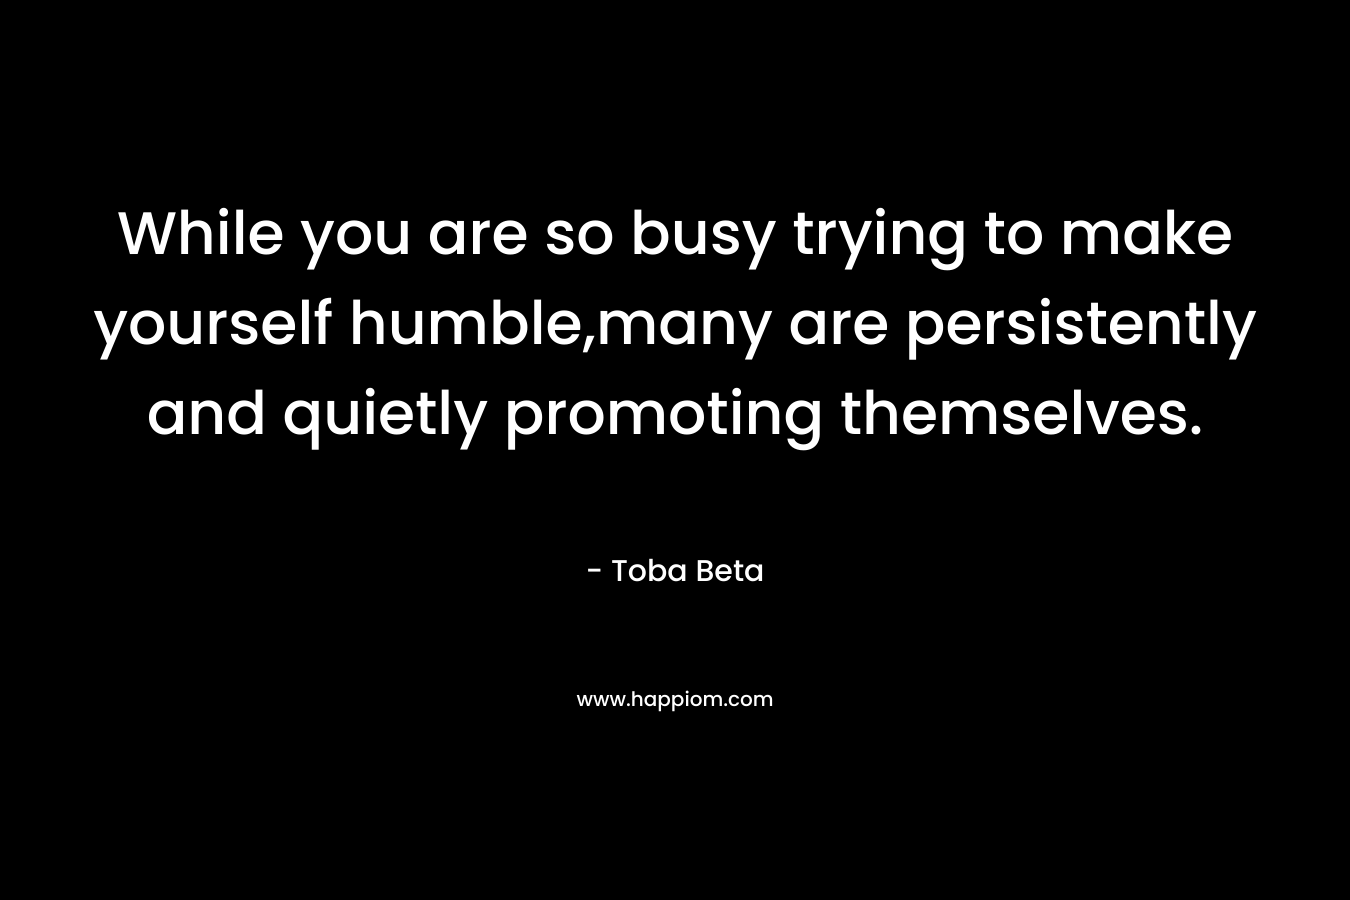 While you are so busy trying to make yourself humble,many are persistently and quietly promoting themselves. – Toba Beta